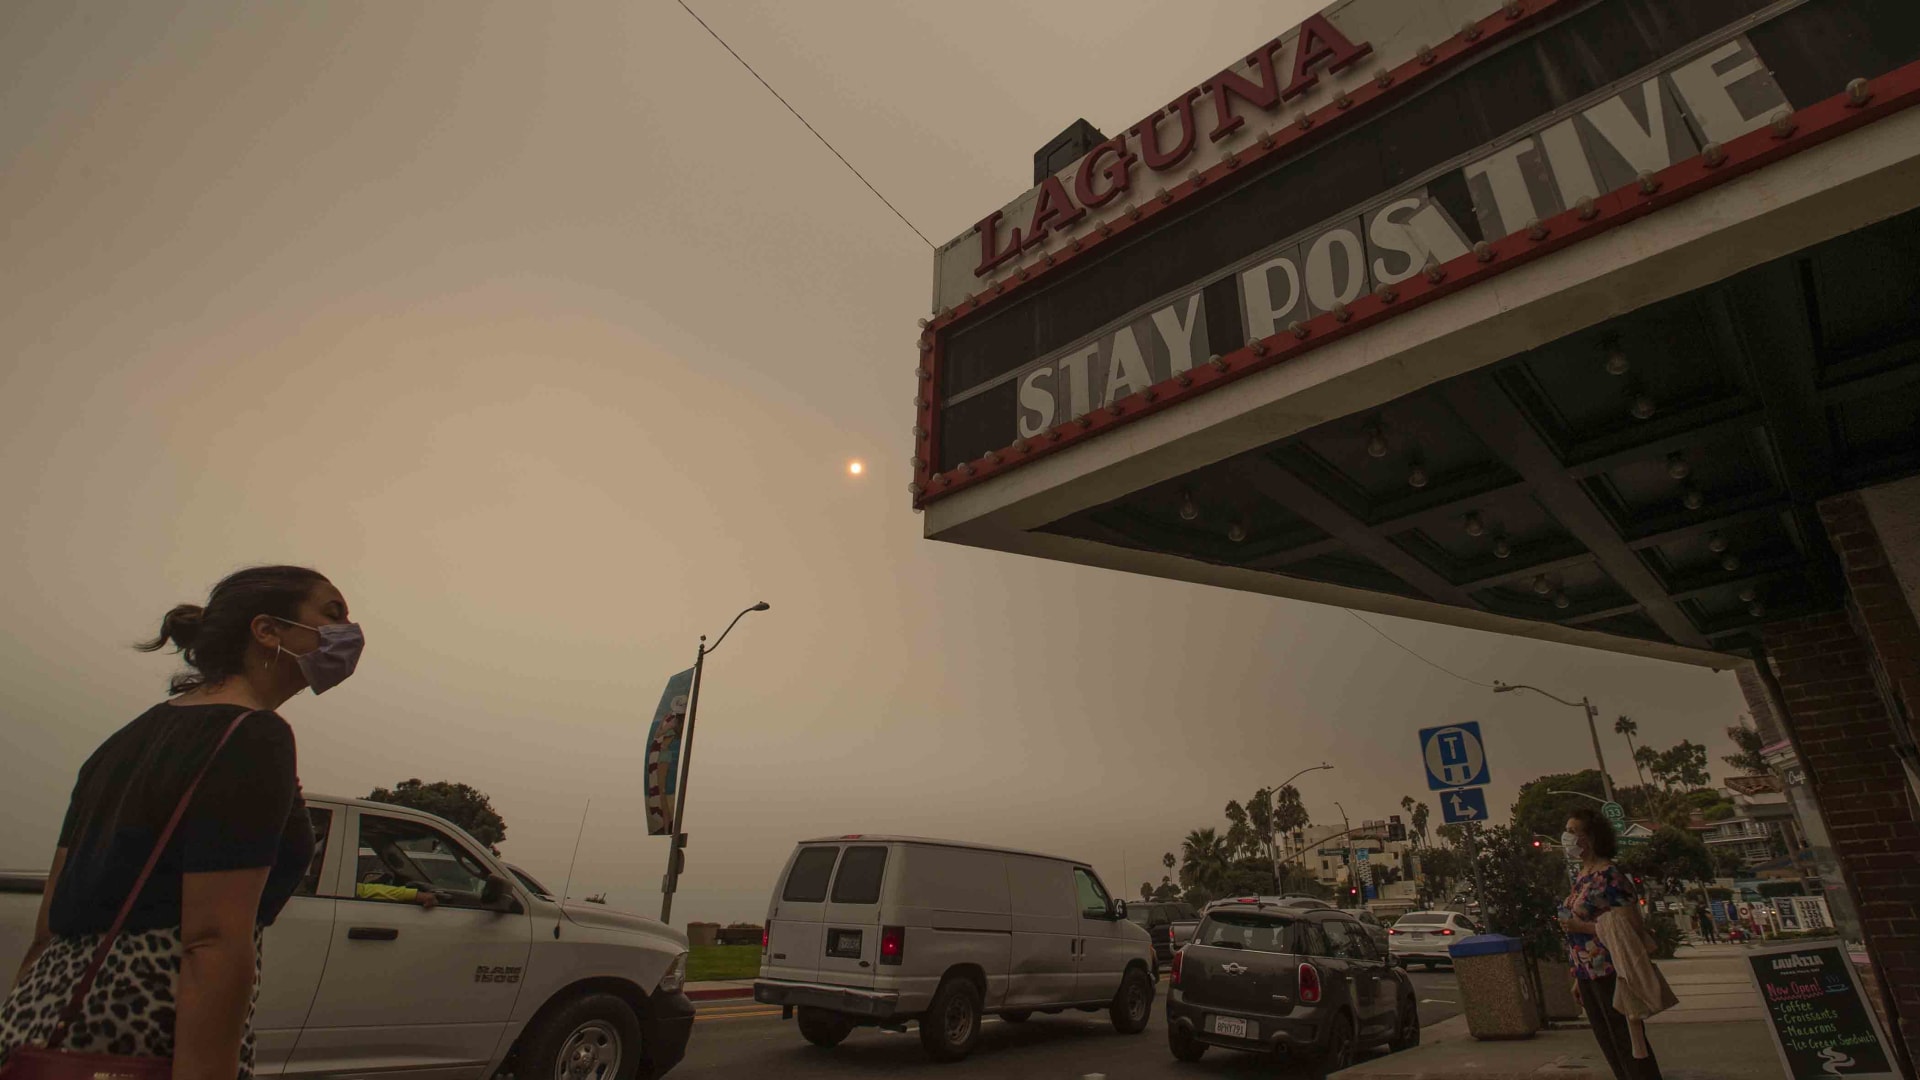 A woman walks past the The South Coast Cinemas building as the sun and sky are partially obscured with ash from Southland wildfires in Laguna Beach Thursday, Sept. 10, 2020.